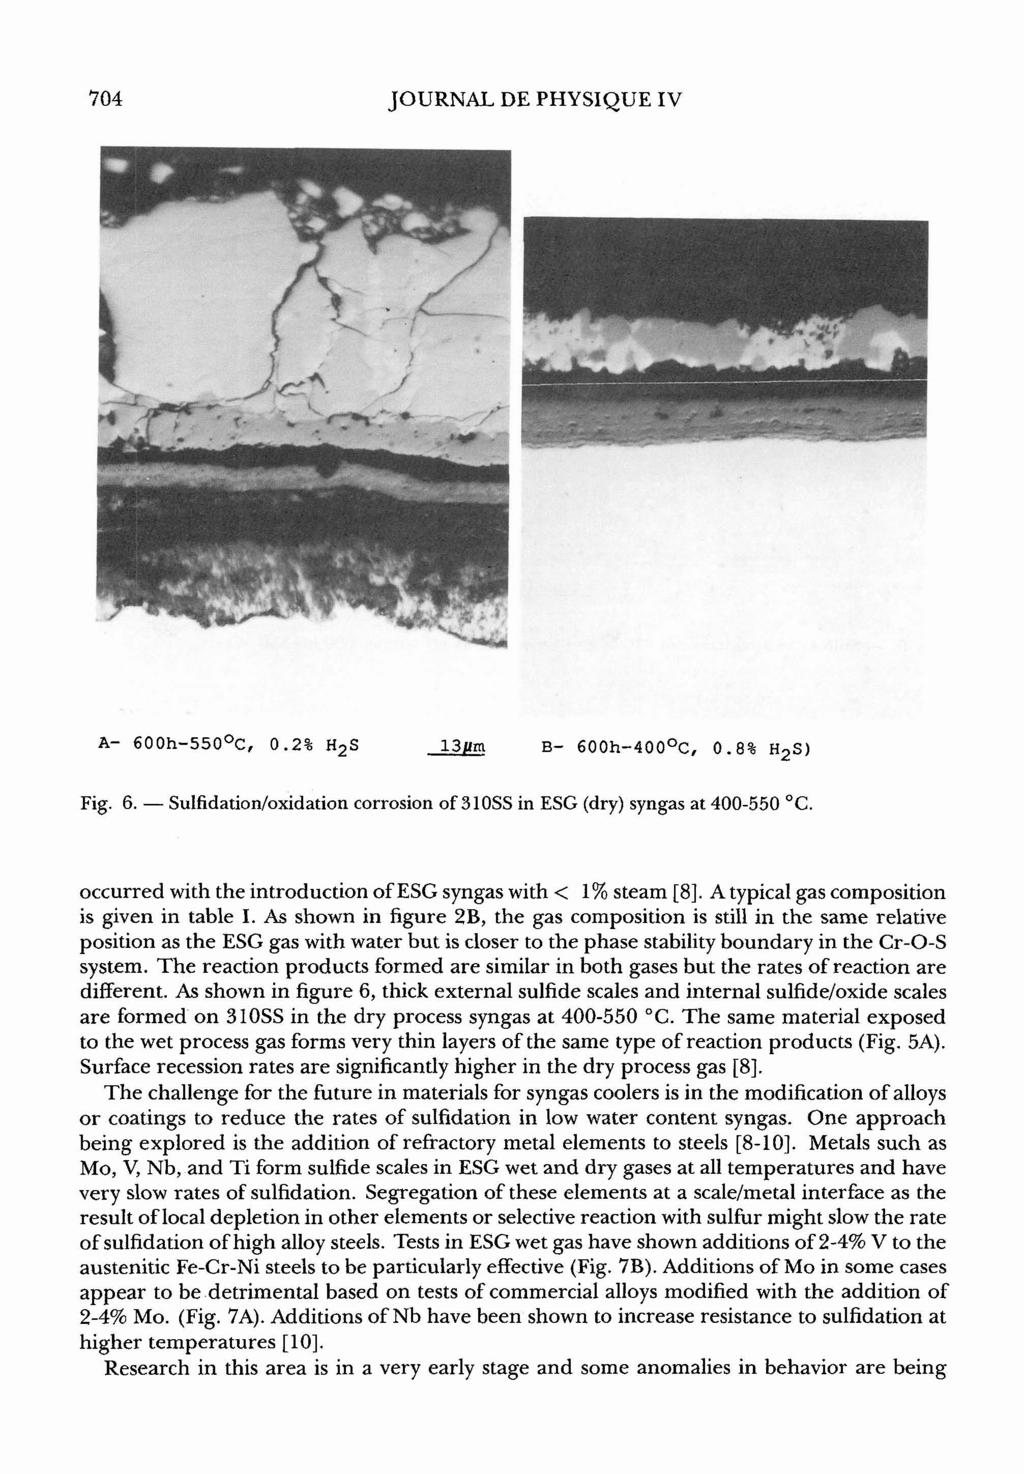 '704 JOURNAL DE PHYSIQUE IV Fig. 6. - Sulfidation/oxidation corrosion of 310% in ESG (dry) syngas at 400-550 OC. occurred with the introduction of ESG syngas with < 1% steam [8].